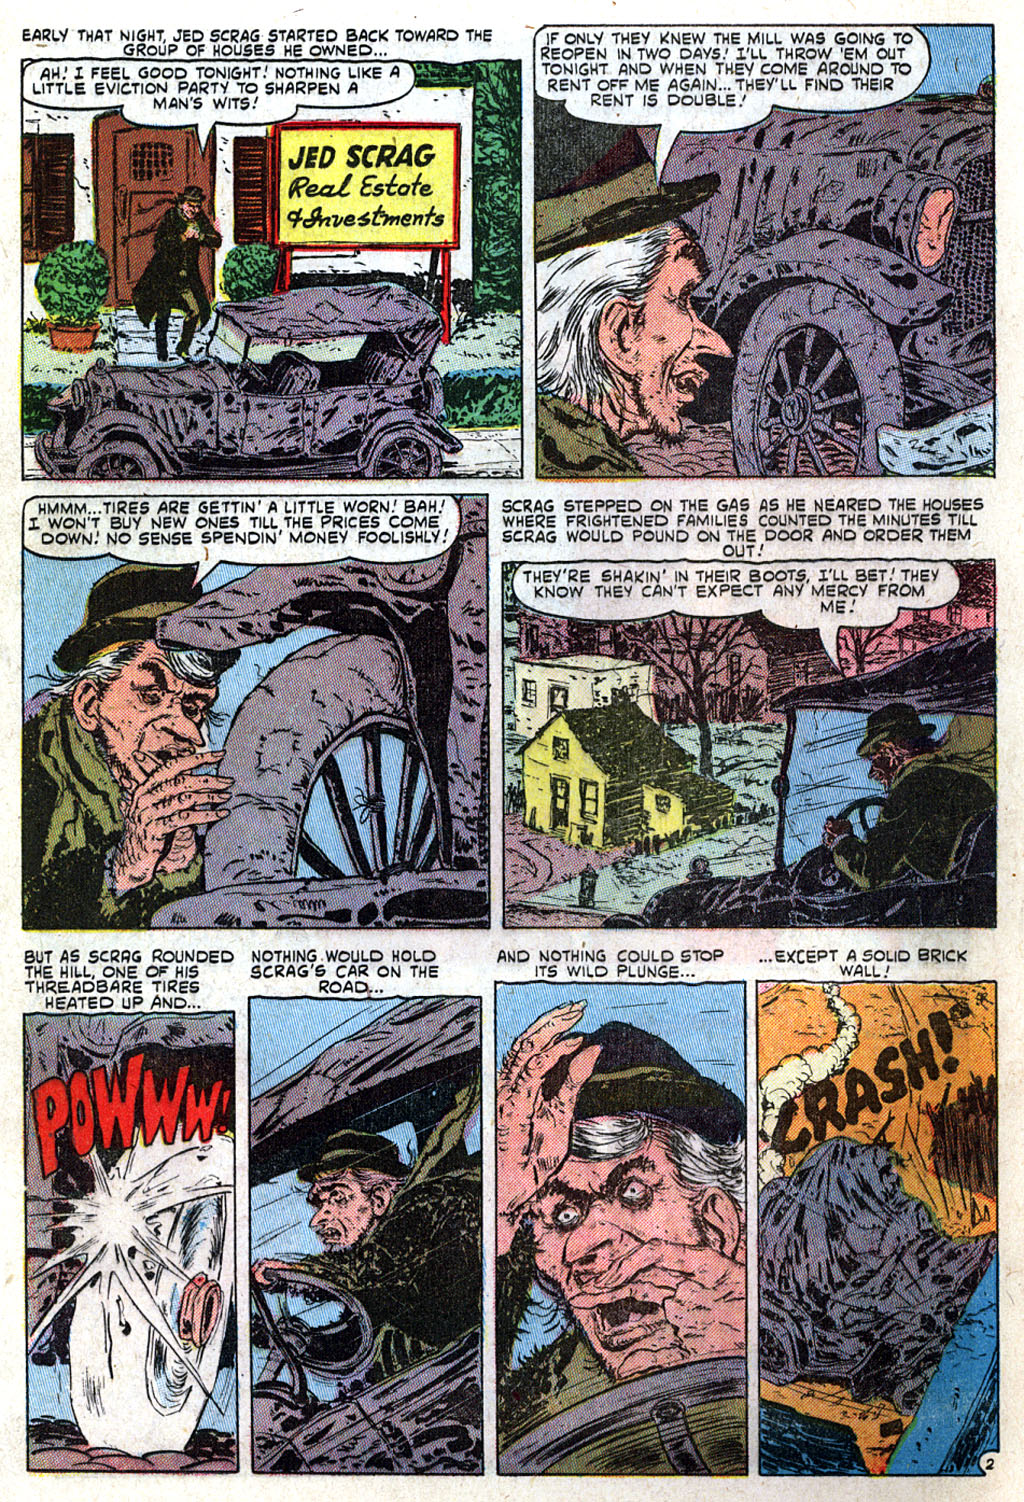 Marvel Tales (1949) 116 Page 22